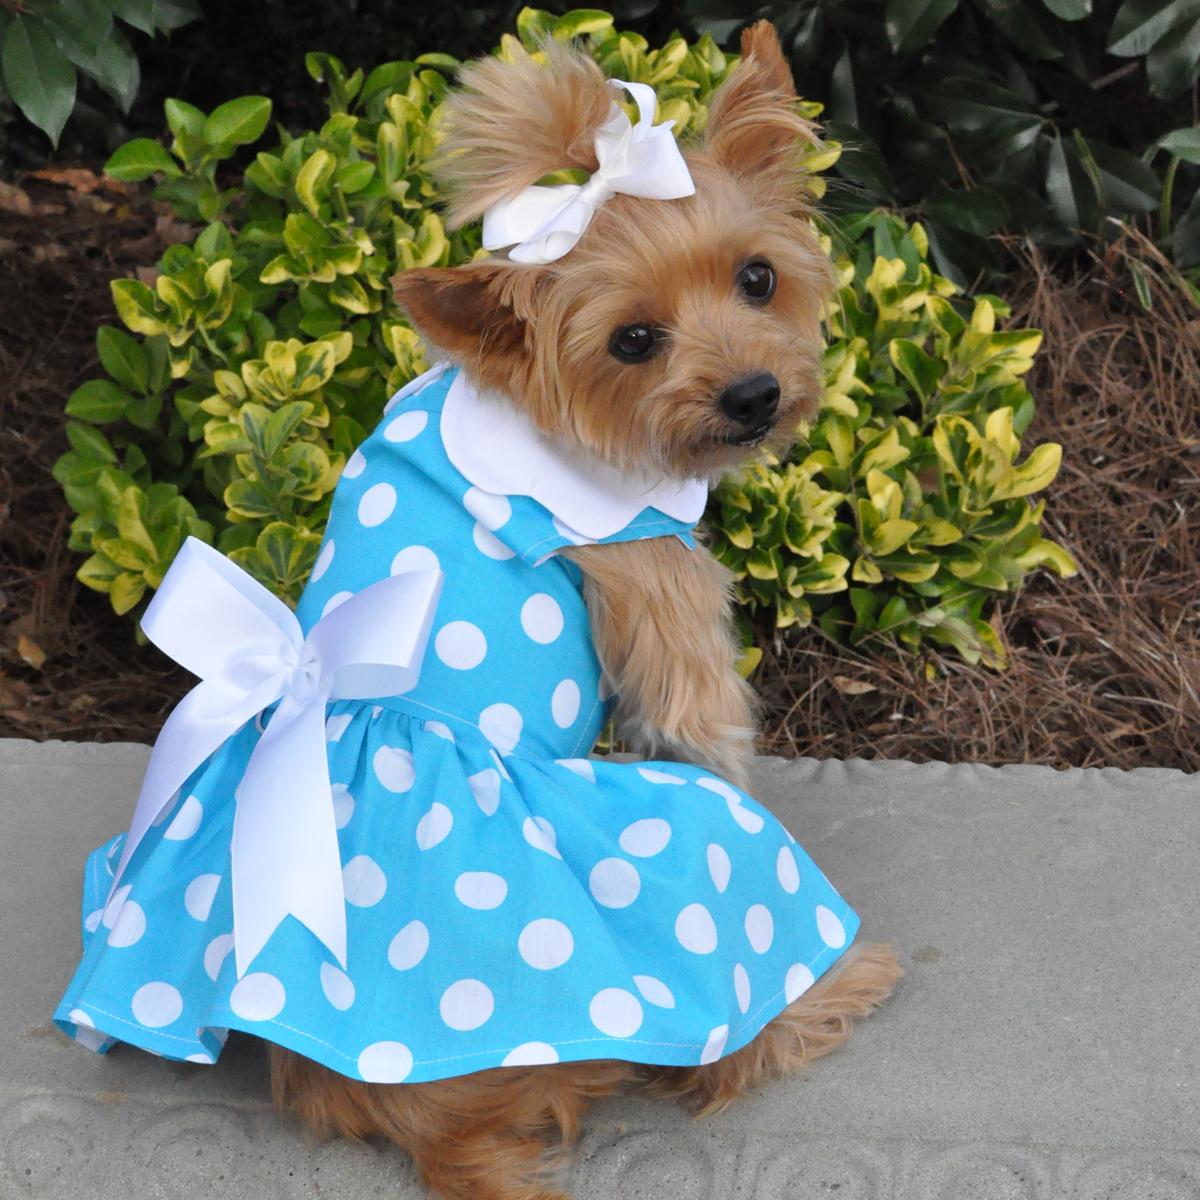 Blue Polka Dot Dog Dress with Matching Leash by Doggie Design